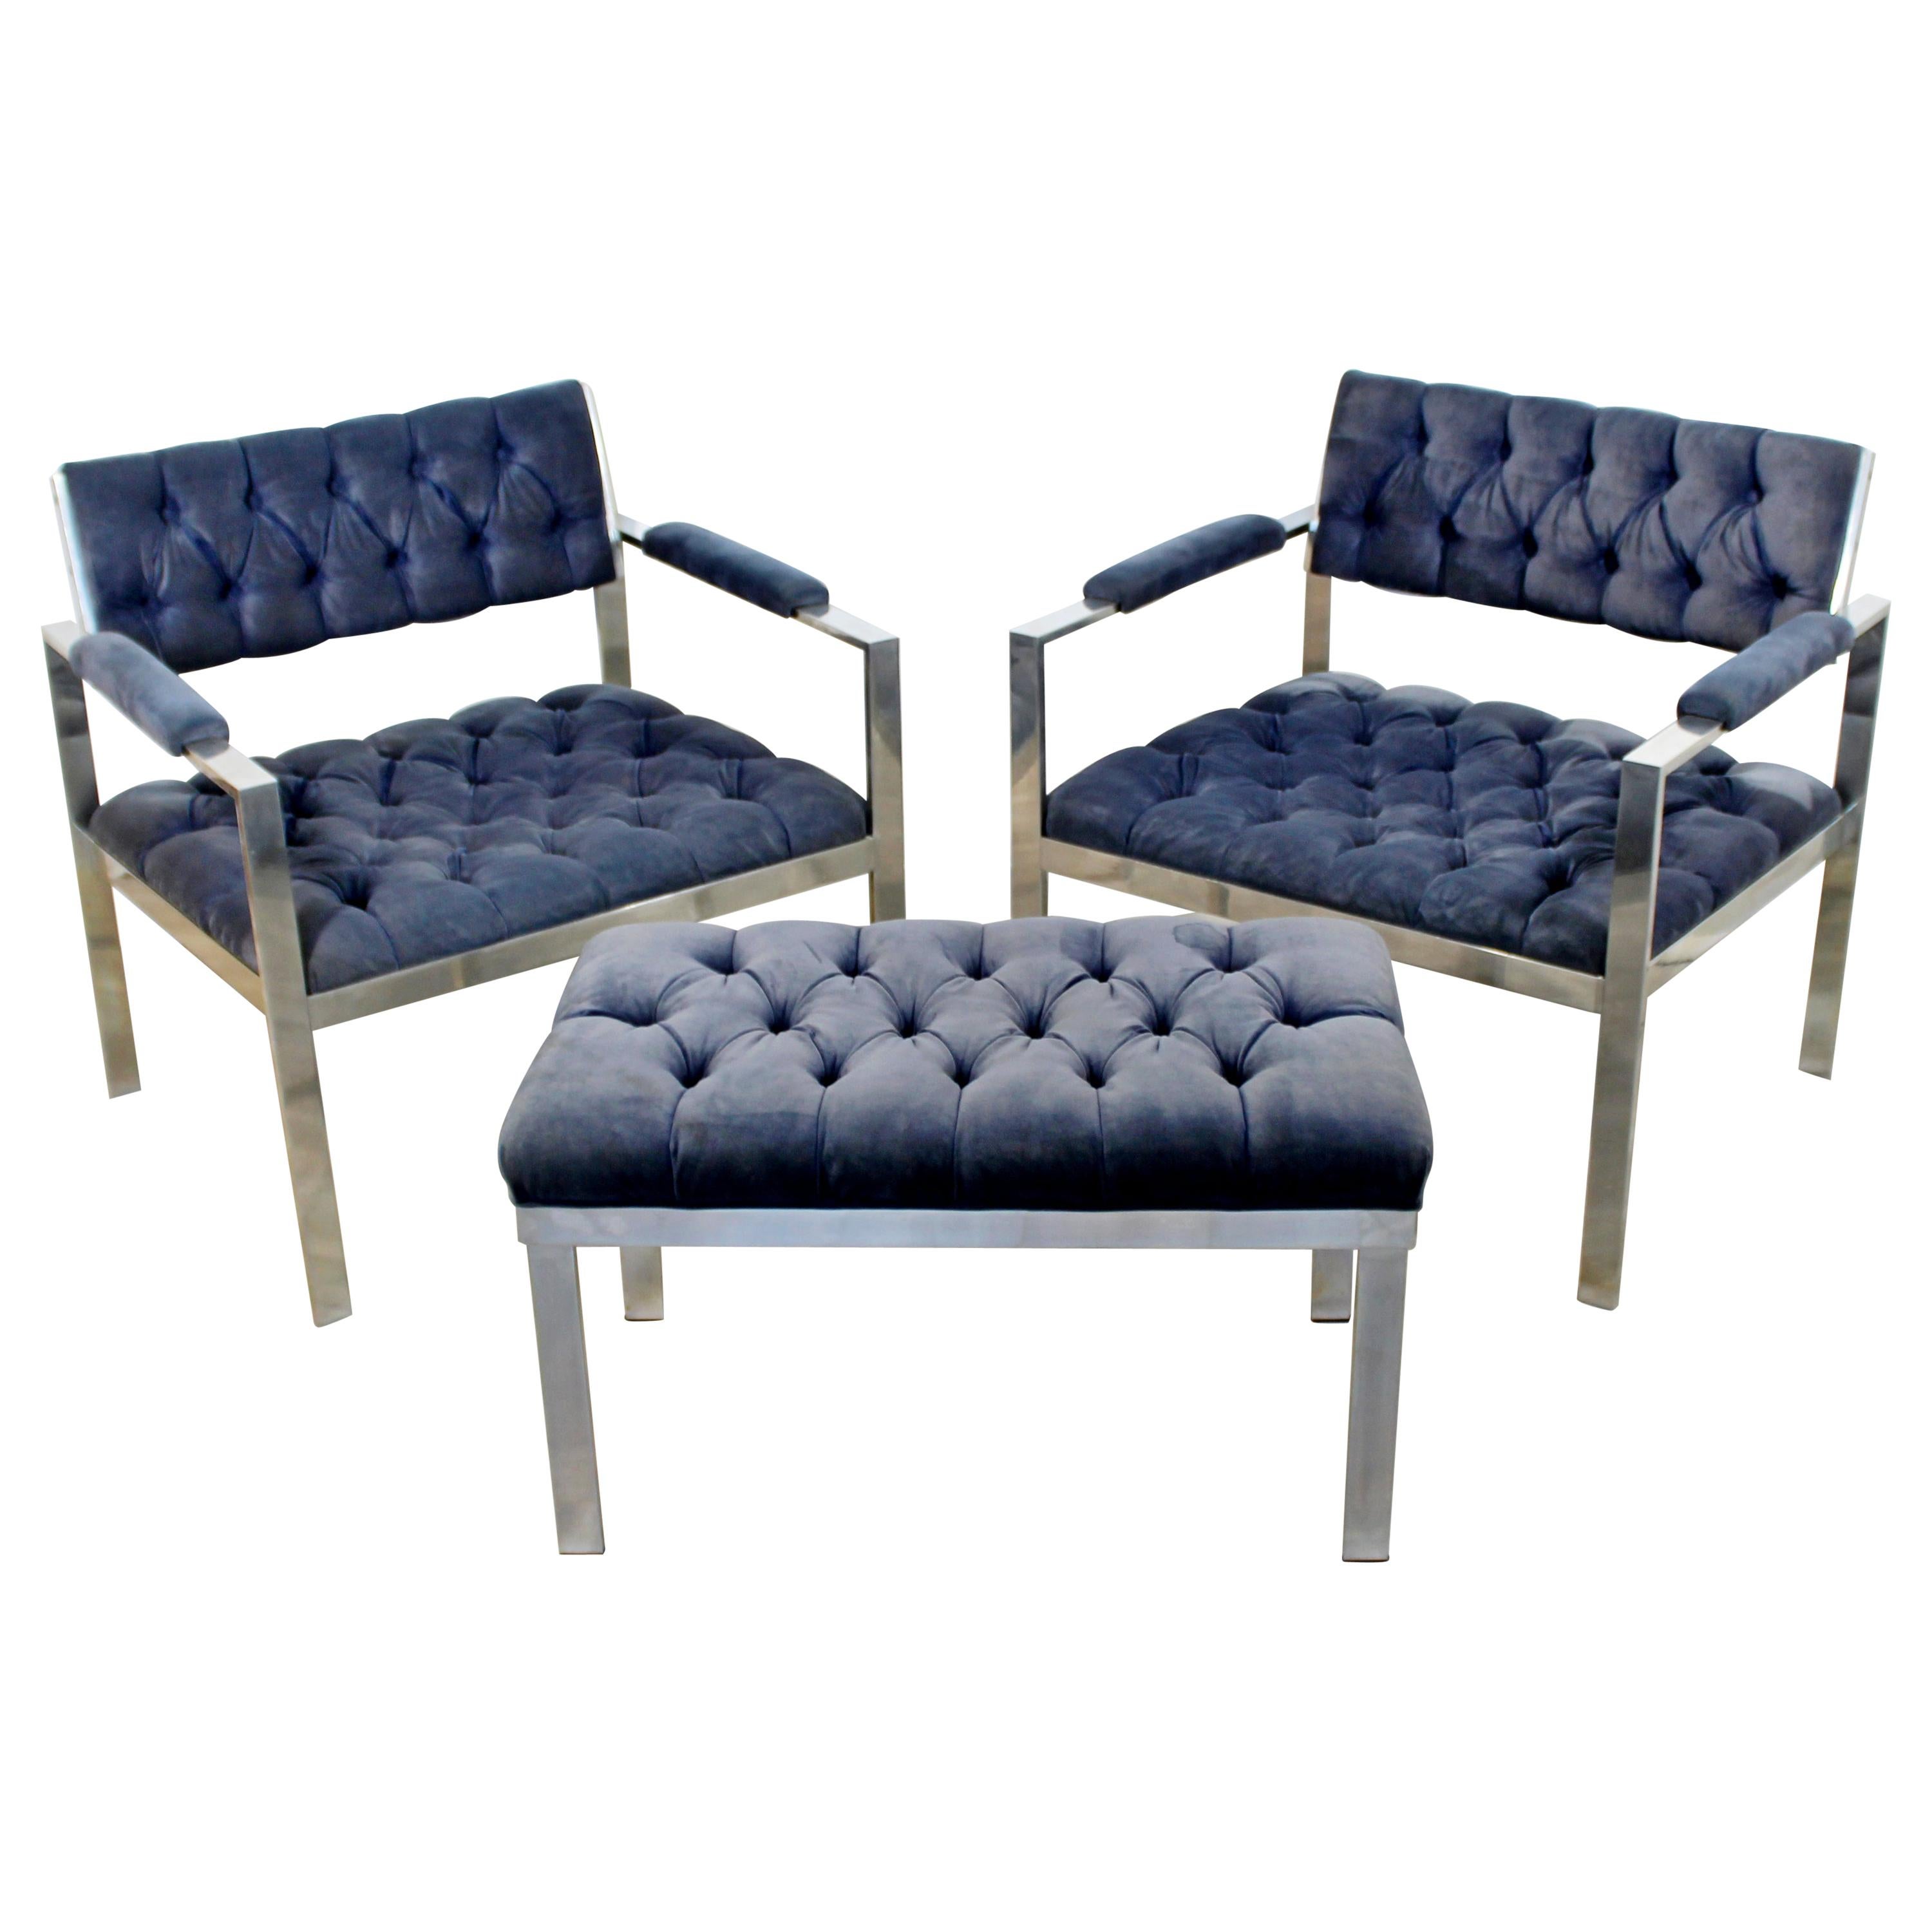 Mid-Century Modern Pair of Chrome Lounge Chairs Harvey Probber Ottoman Bench